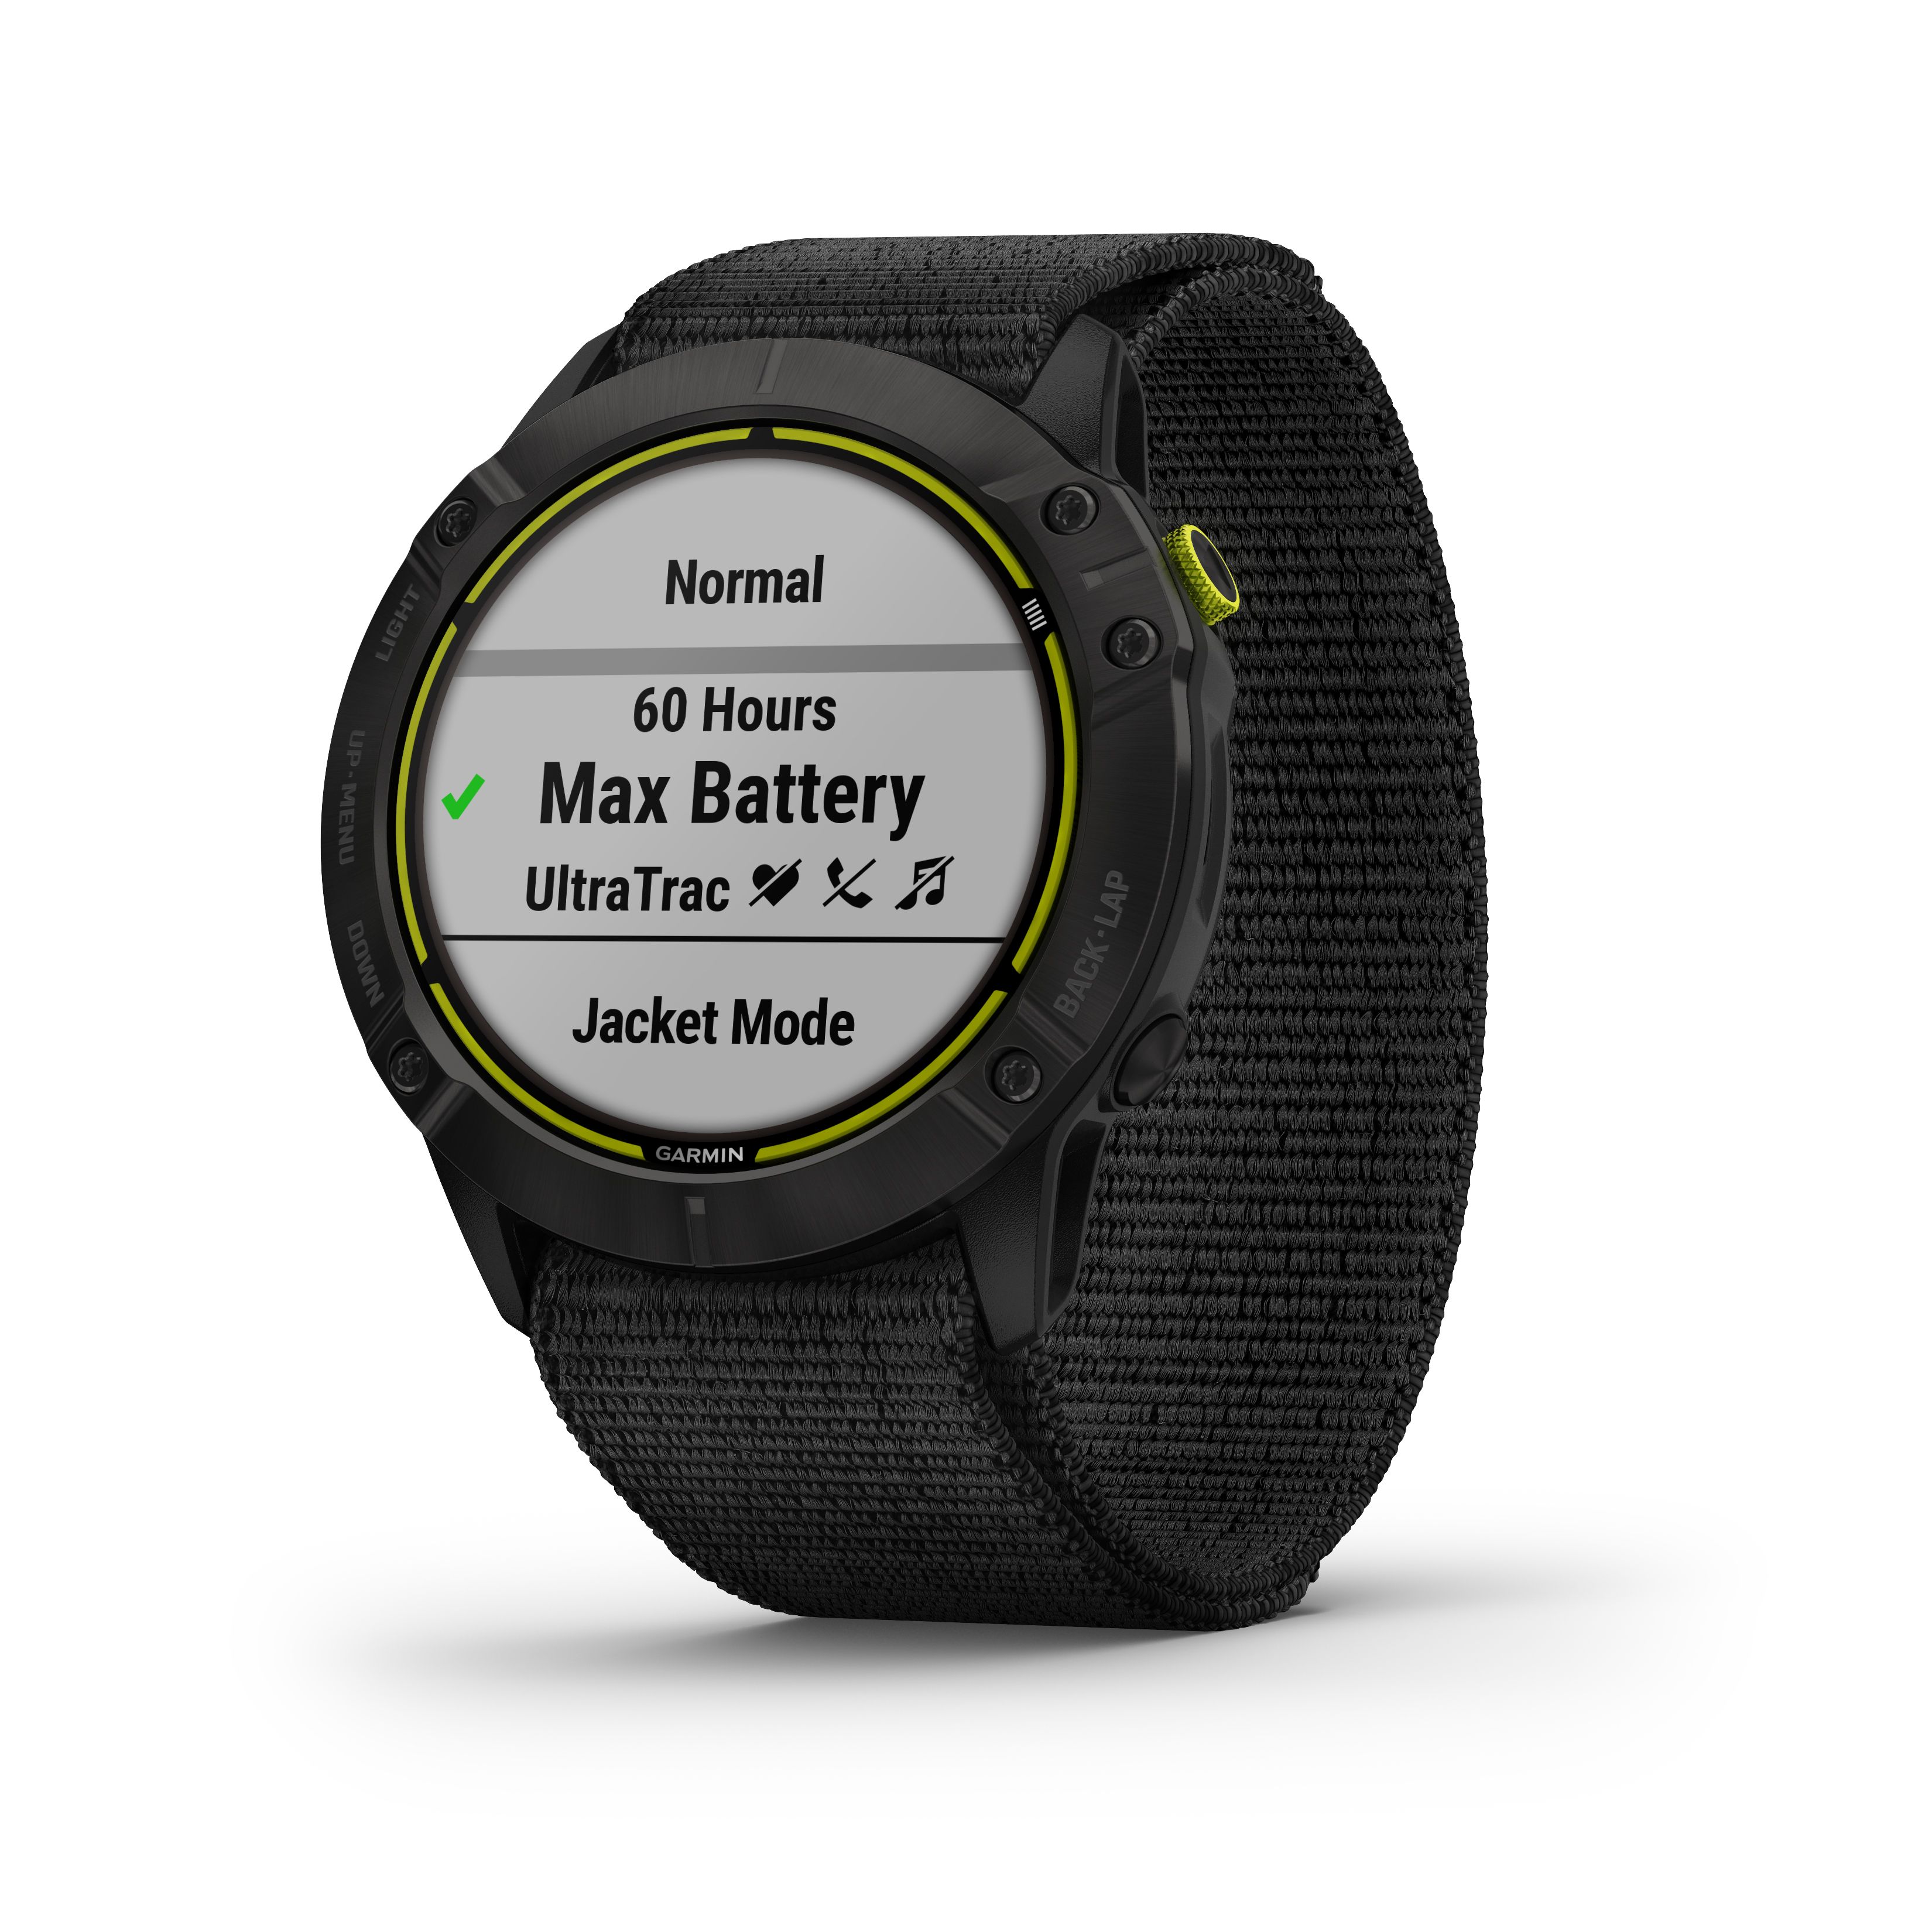 Garmin launches the Enduro - designed for ultra adventures